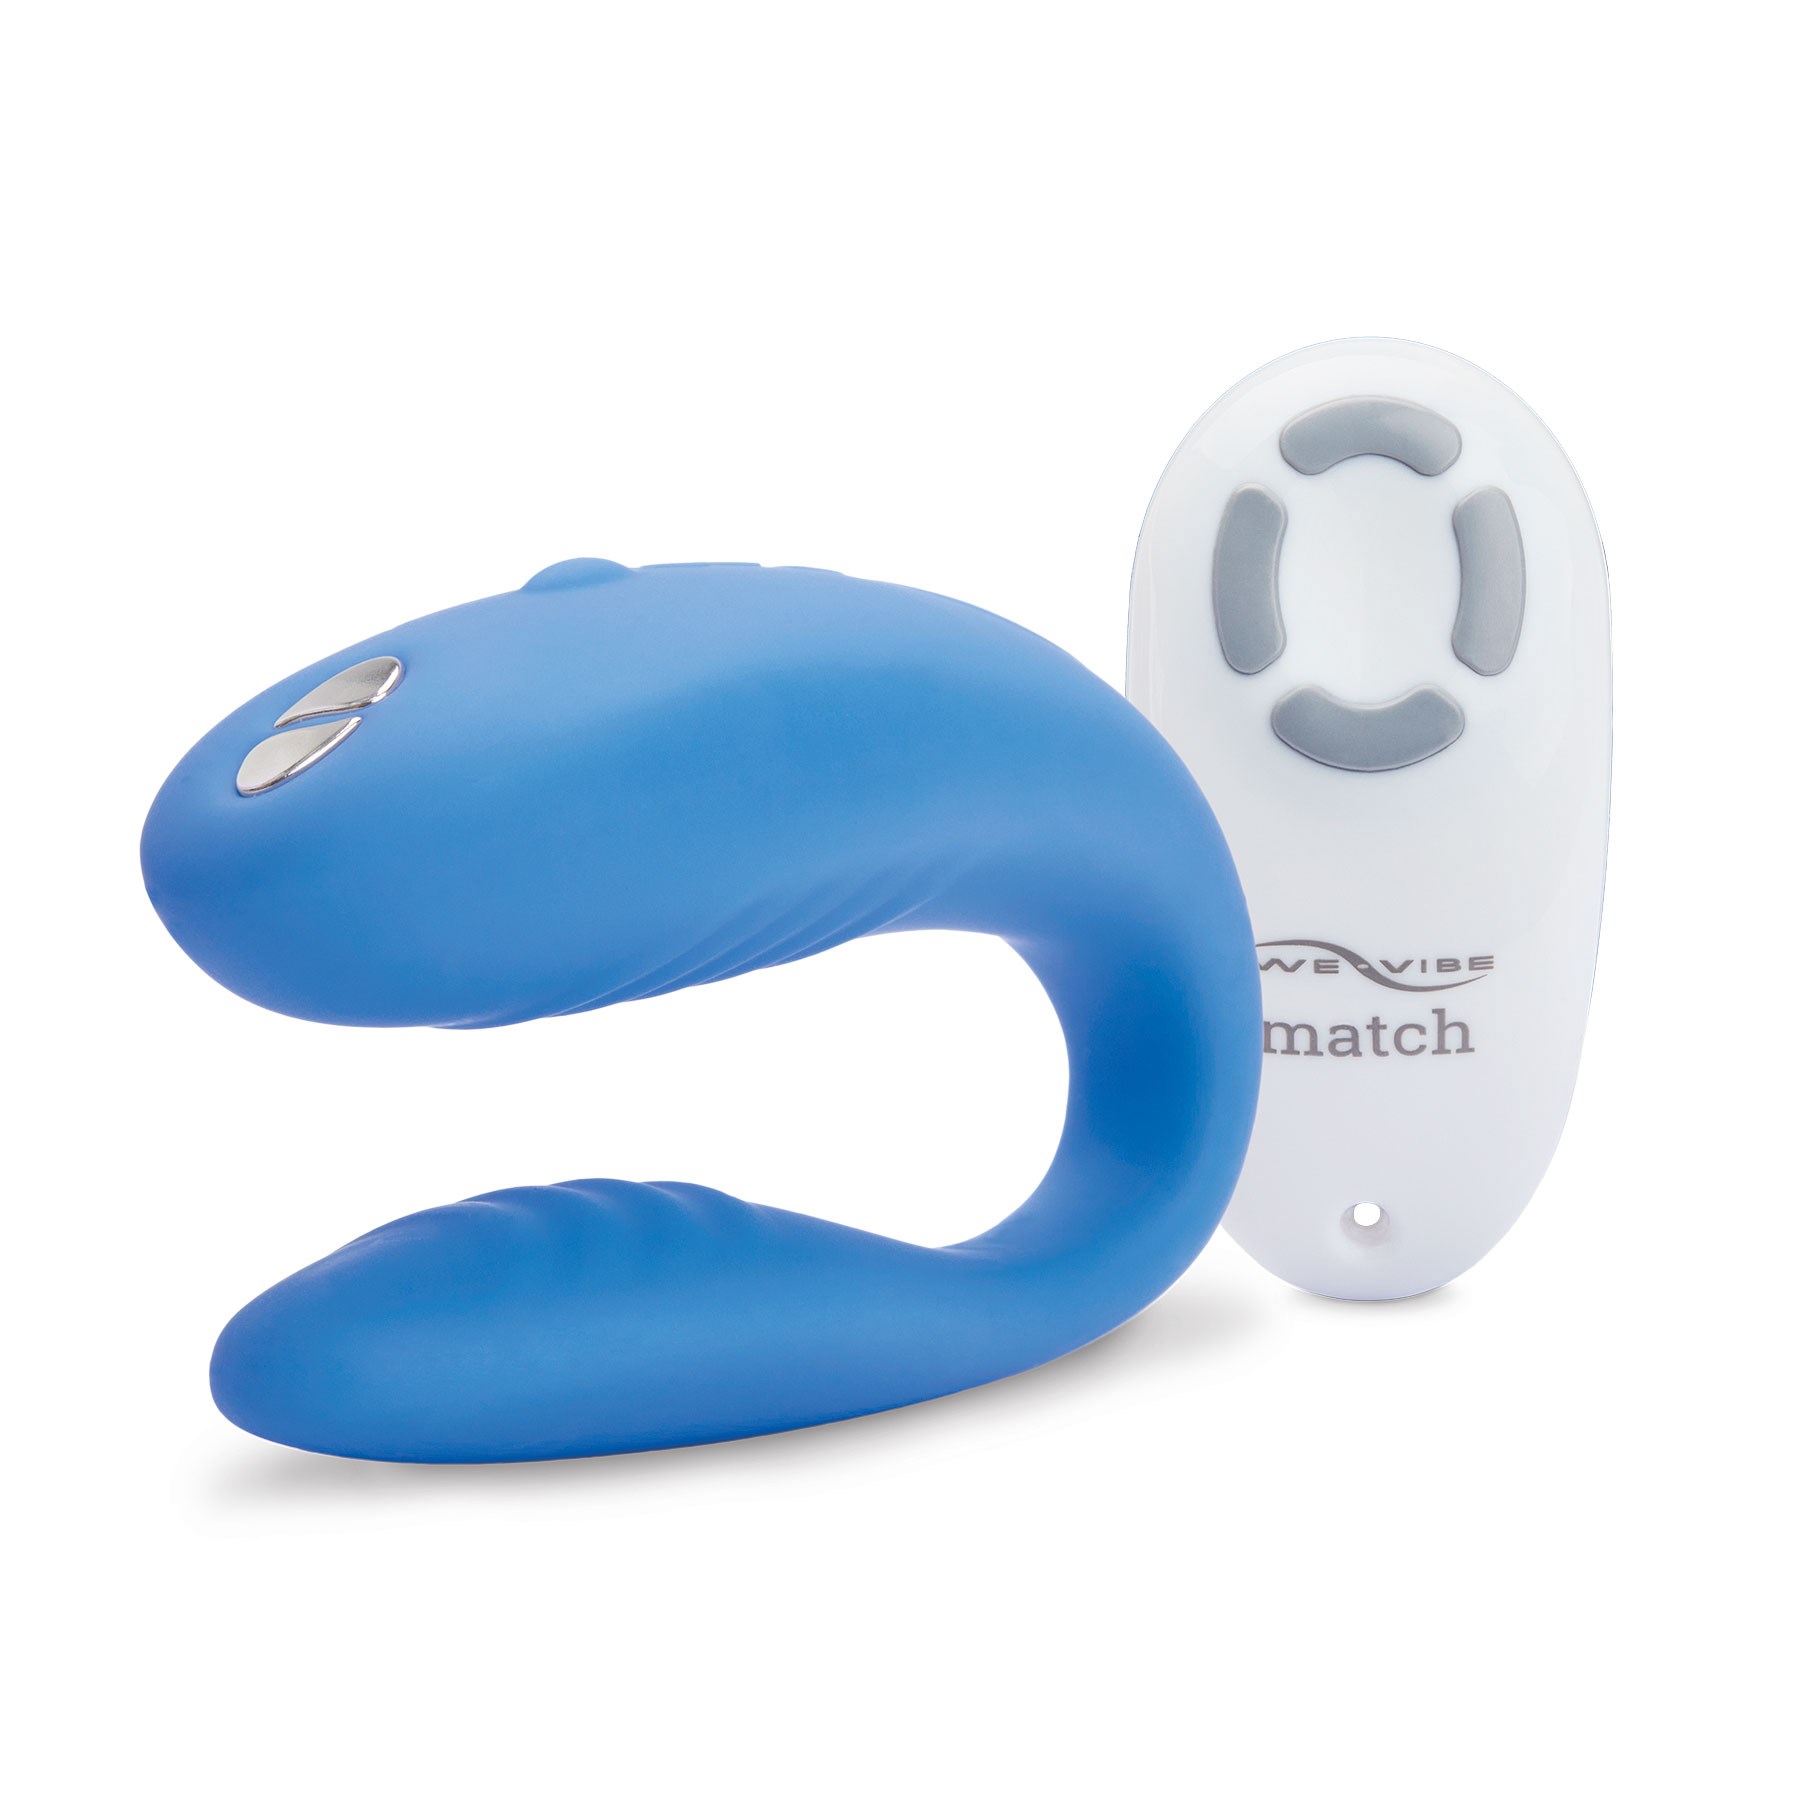 We-Vibe Match Couples Massager with remote